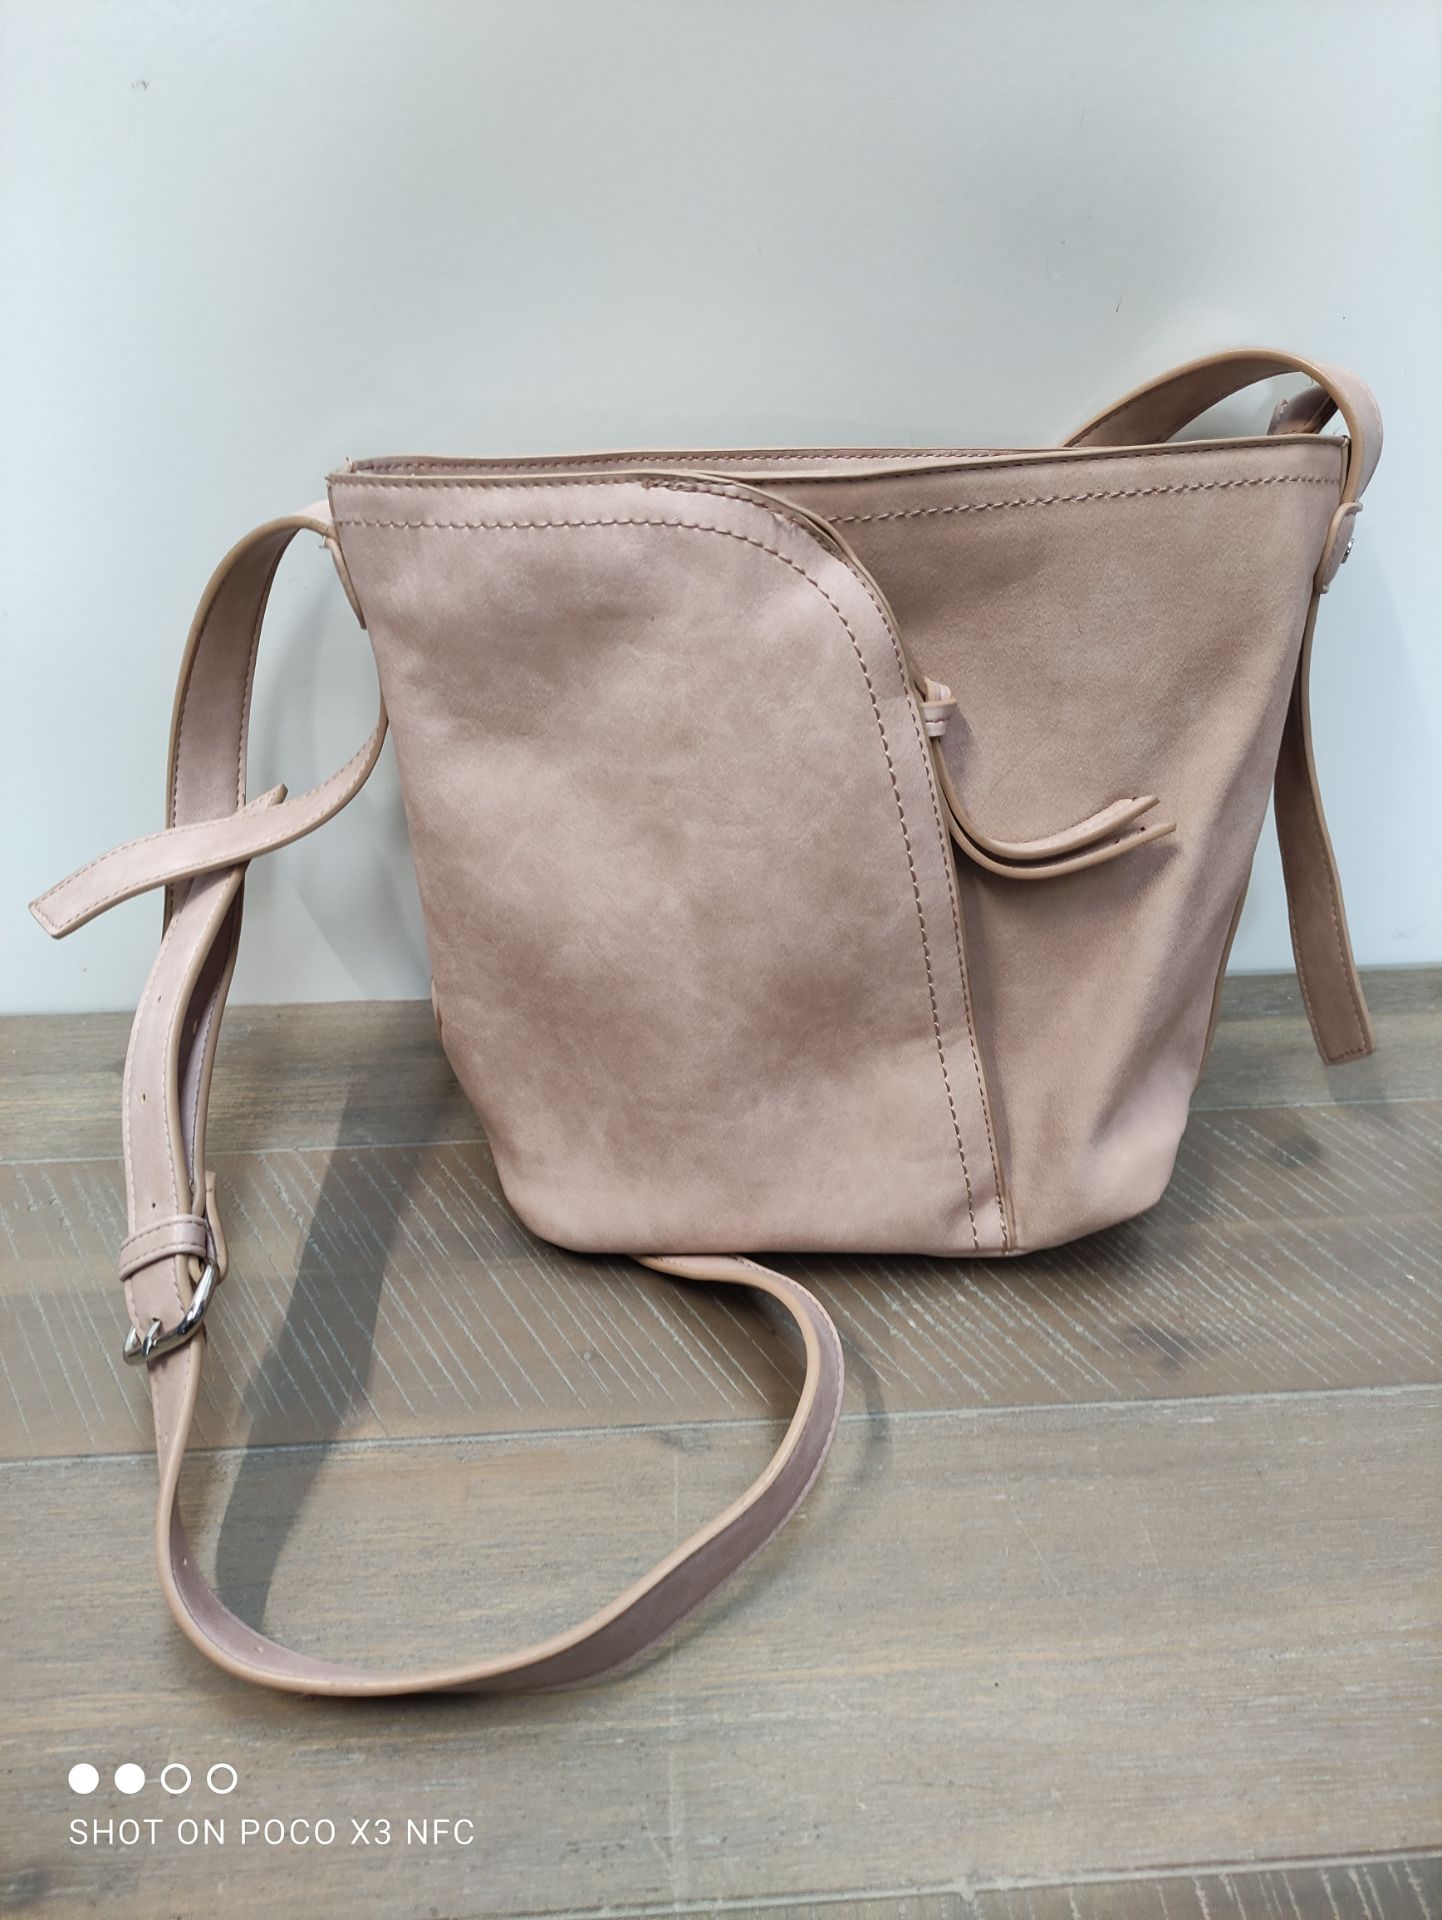 1 NEXT BABY PINK LEATHER BAG Condition ReportAppraisal Available on Request- All Items are